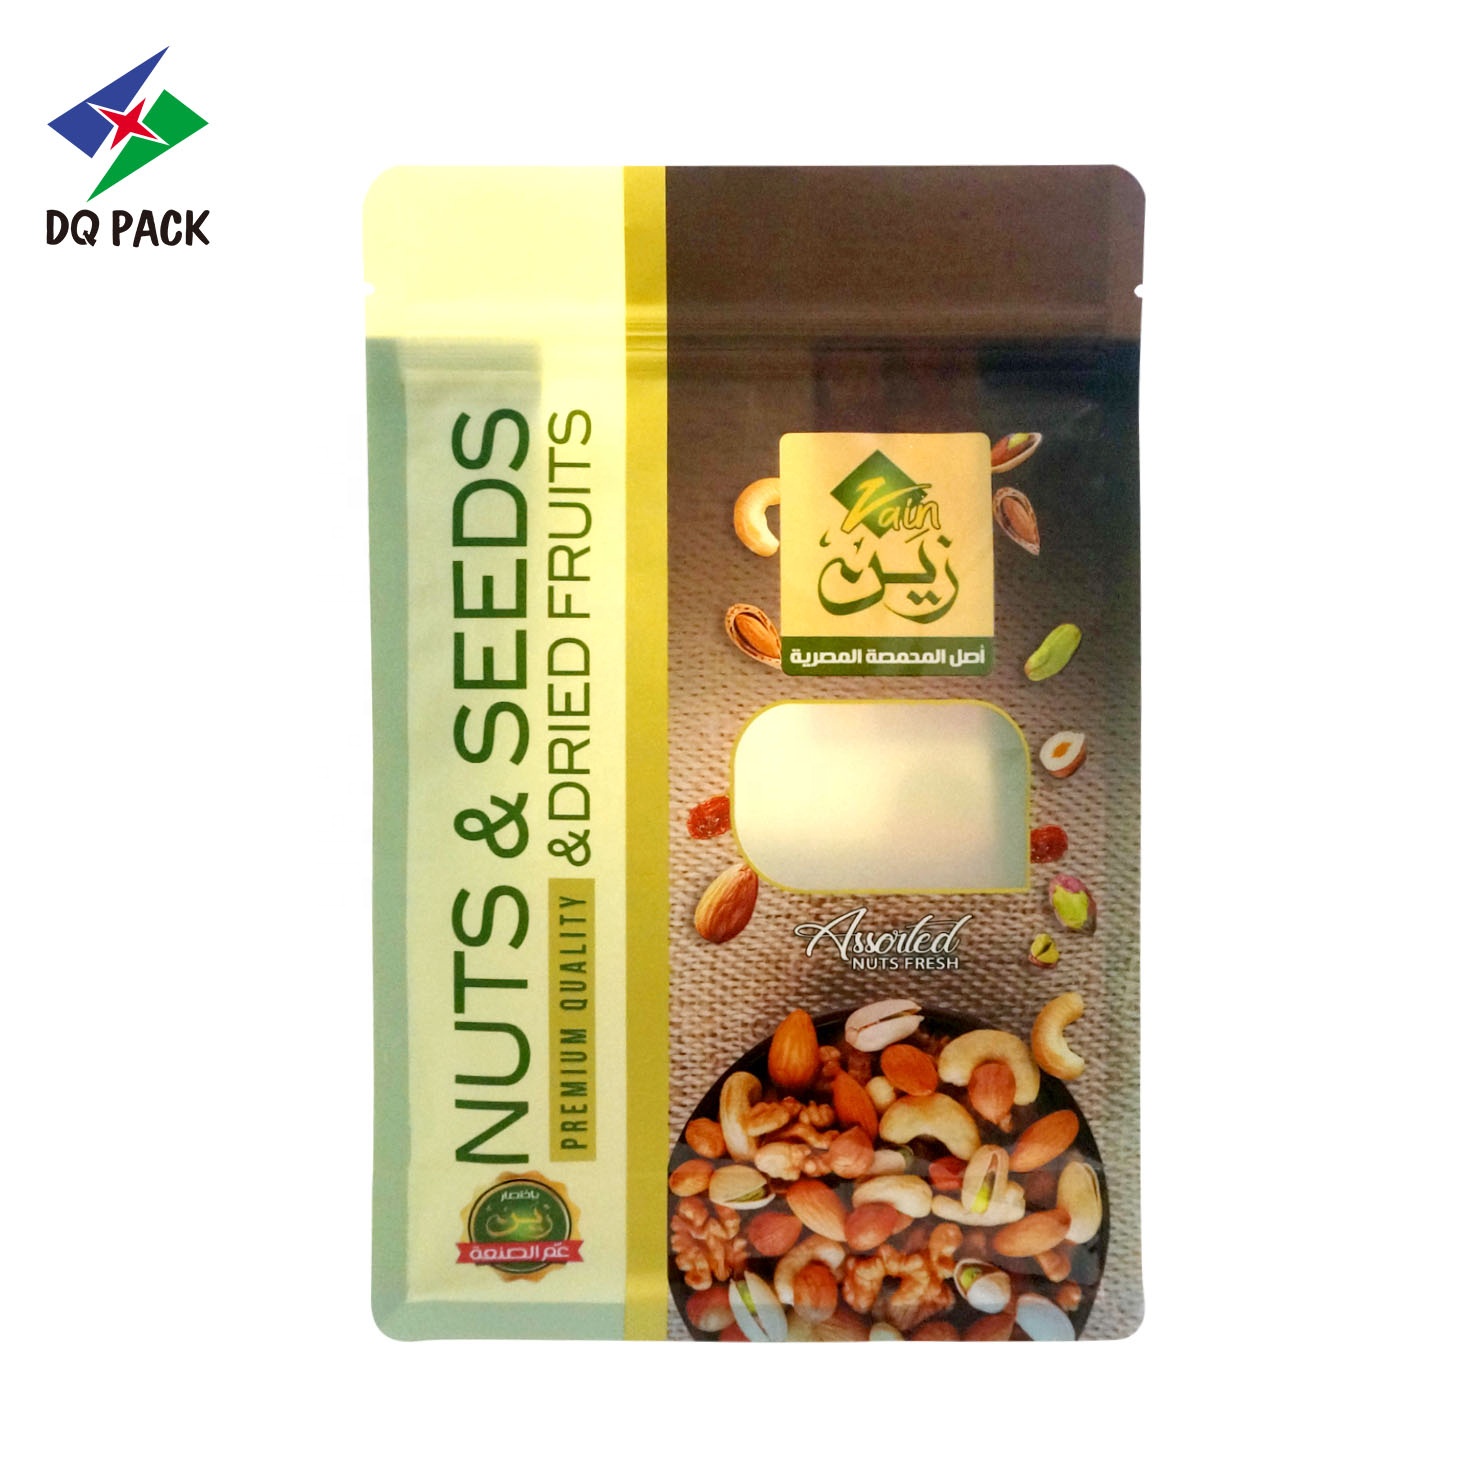 DQ PACK China Supplier Custom Logo Square Flat Bottom Pouch Bag Doypack with zipper for food snack nuts dried food packaging